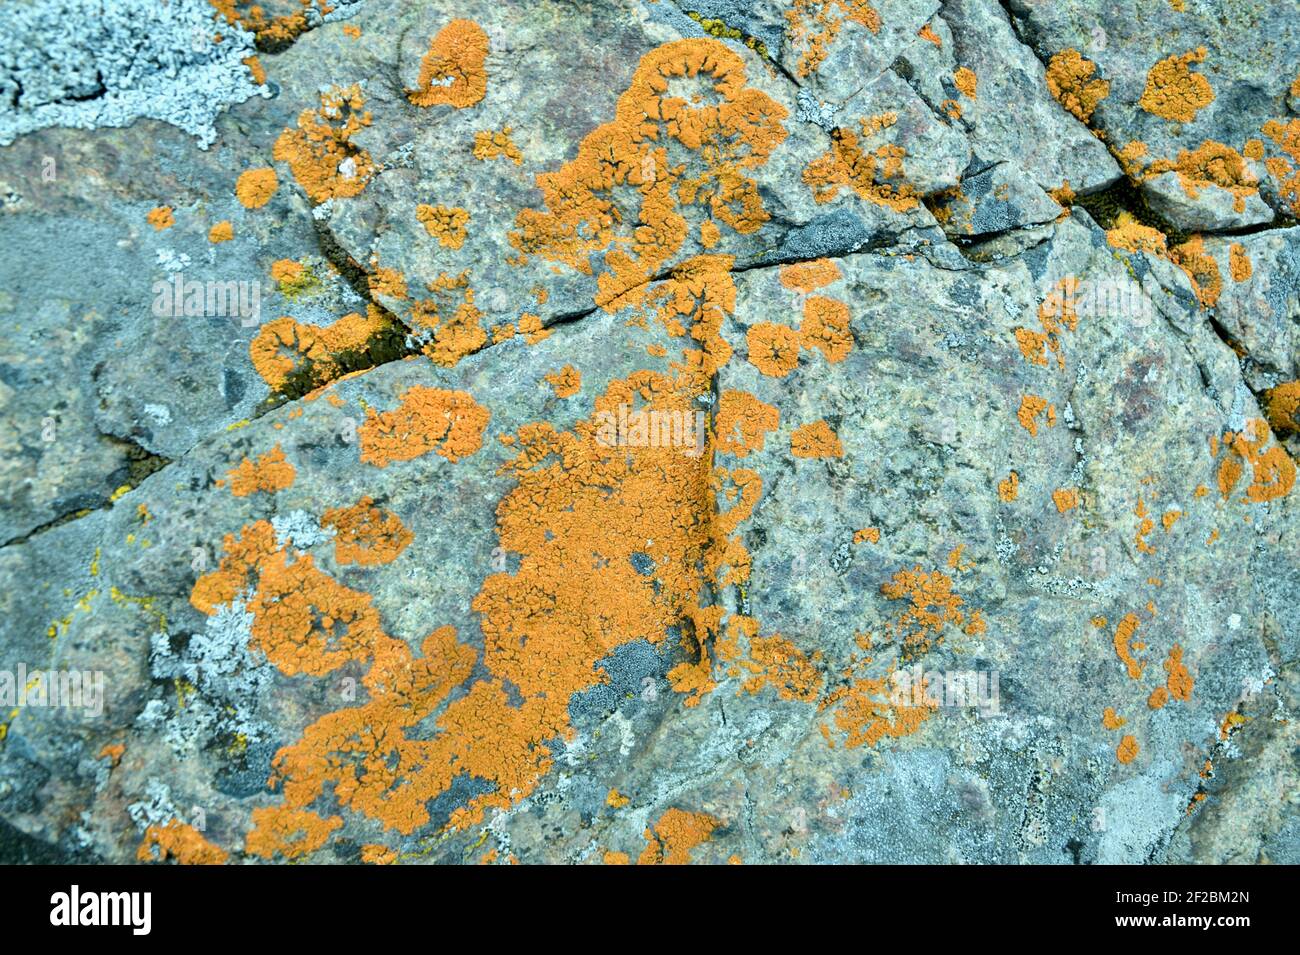 Abstract Background of Colorful Orange and Gold Moss on Granite Rocks. Stock Photo